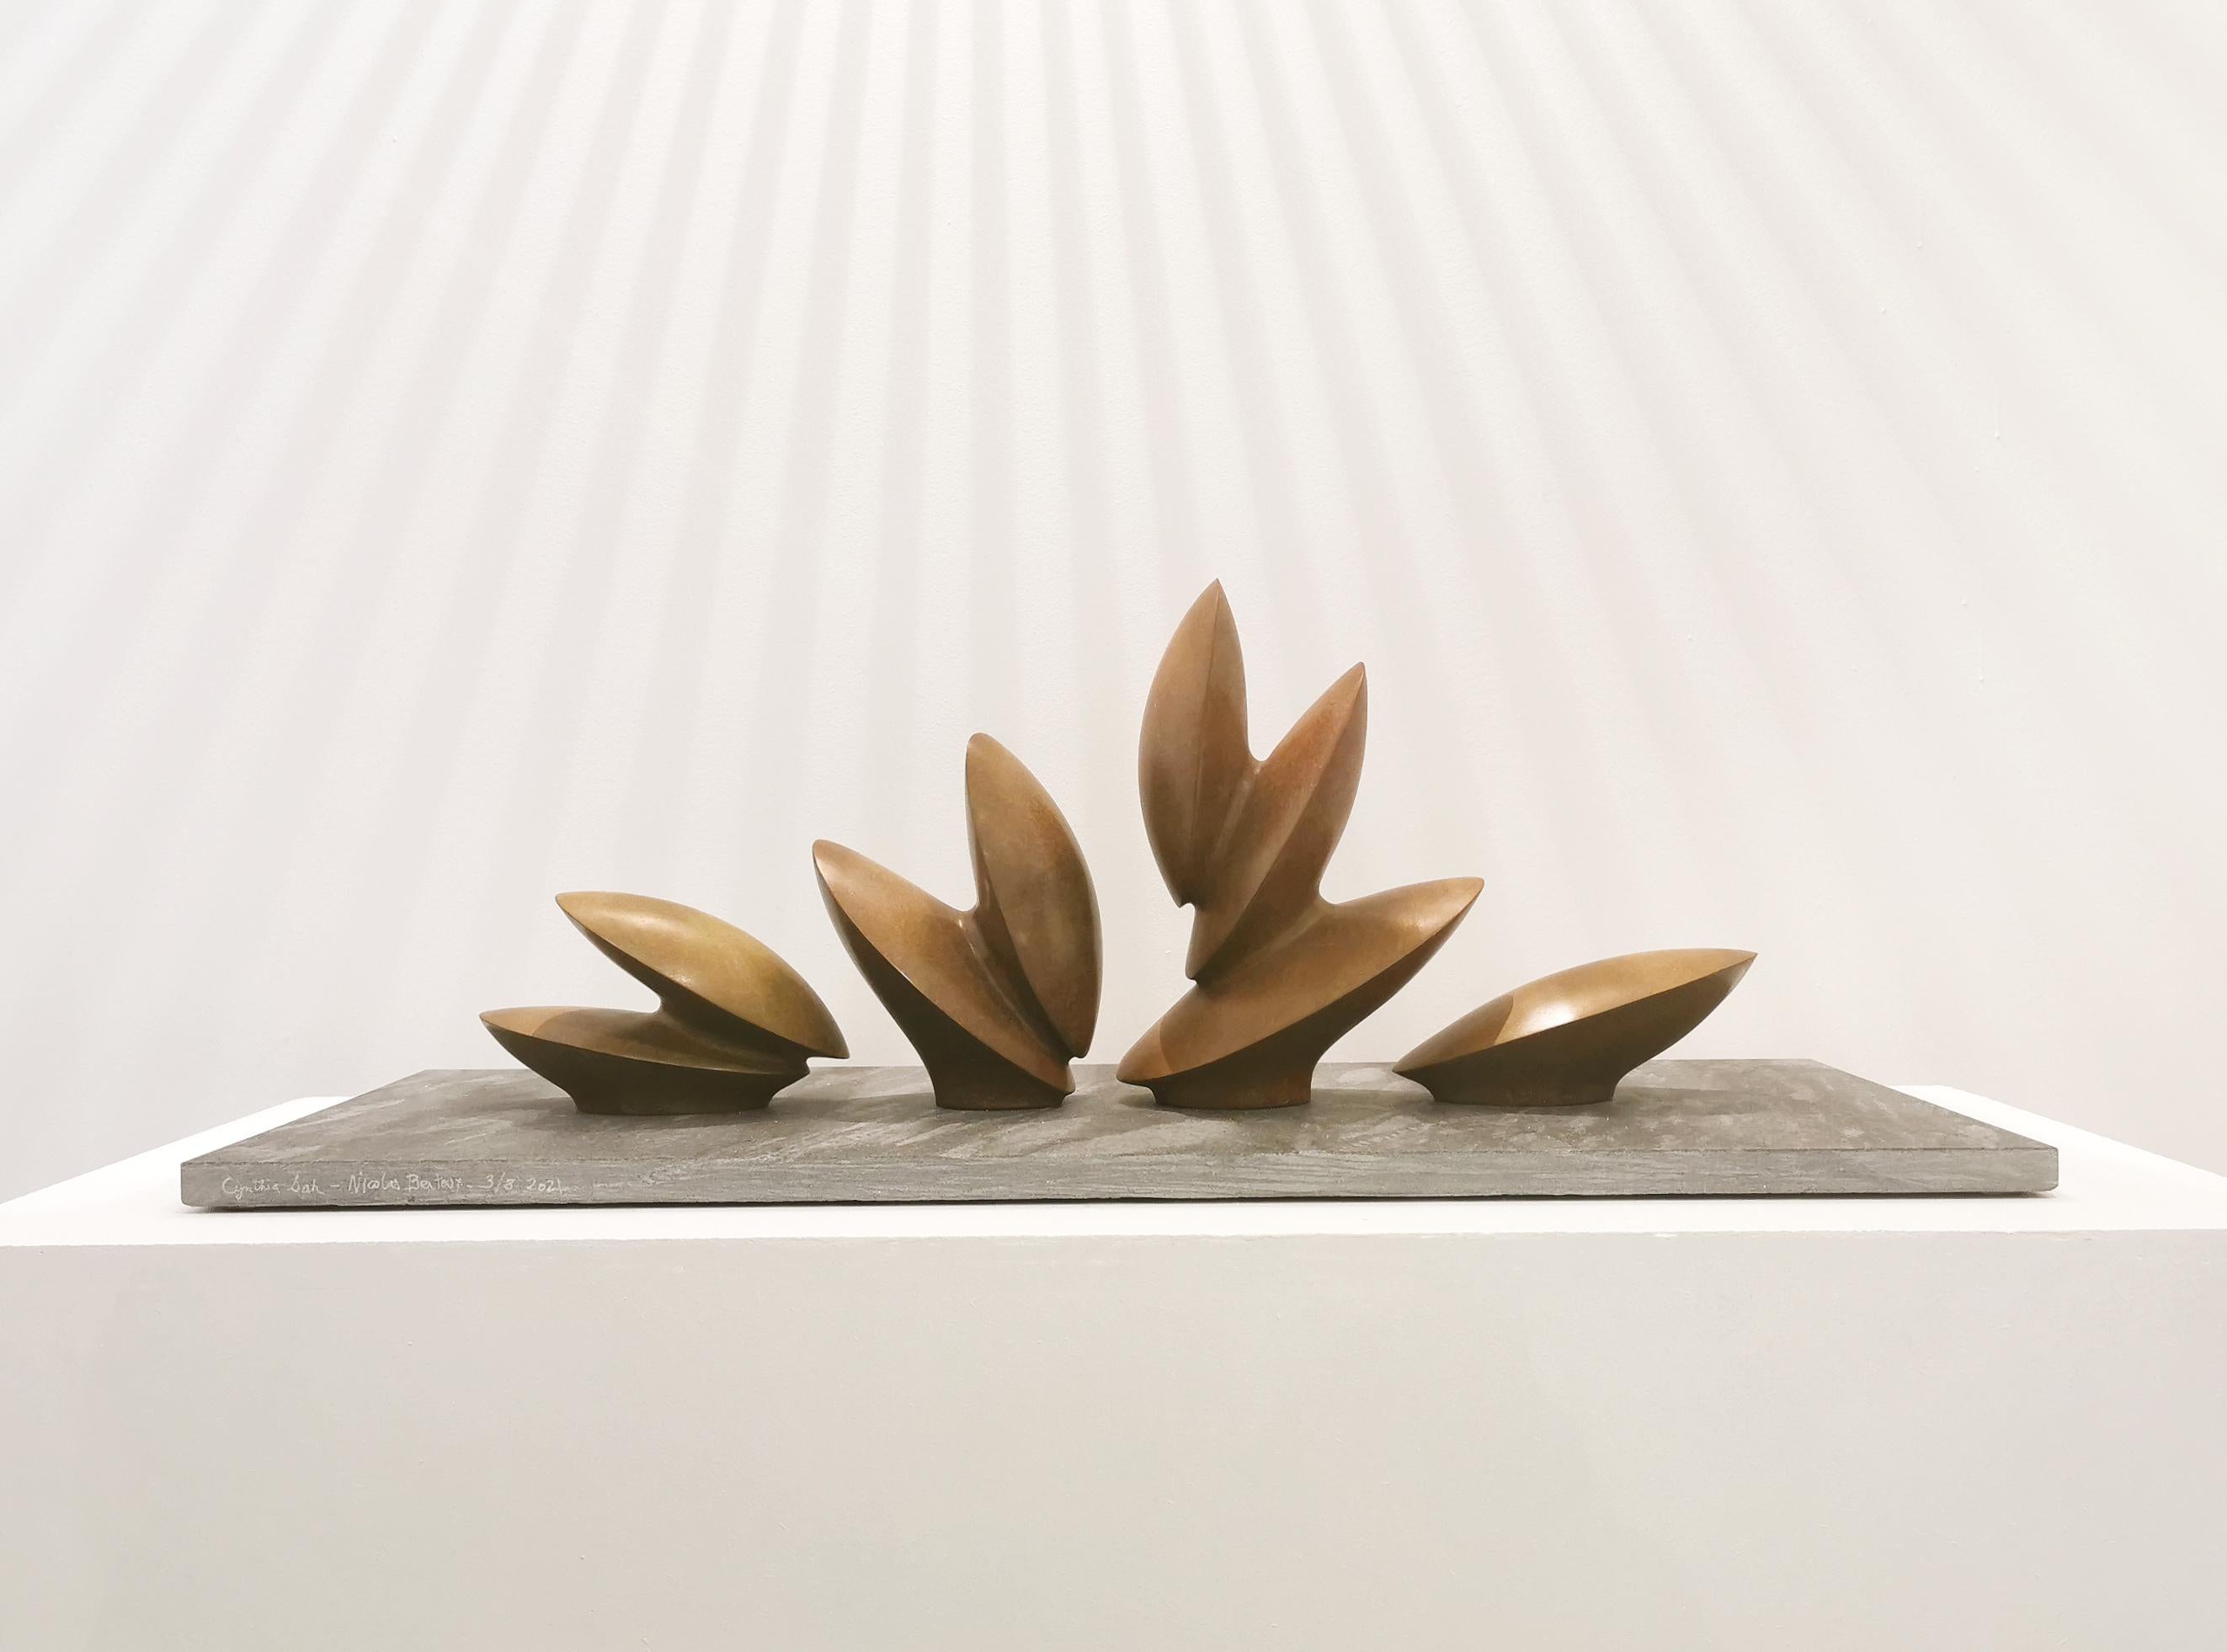 Dancing Leaves
By Nicolas Bertoux & Cynthia Sah
Bronze and marble base
Measures: 11,80’’ x 31,90’’ x 11,60’’
Signed and numbered /8
Delivered with a certificate of authenticity


Dancing Leaves (The Monumental)
Ravaccione white marble
Measures: 6,8